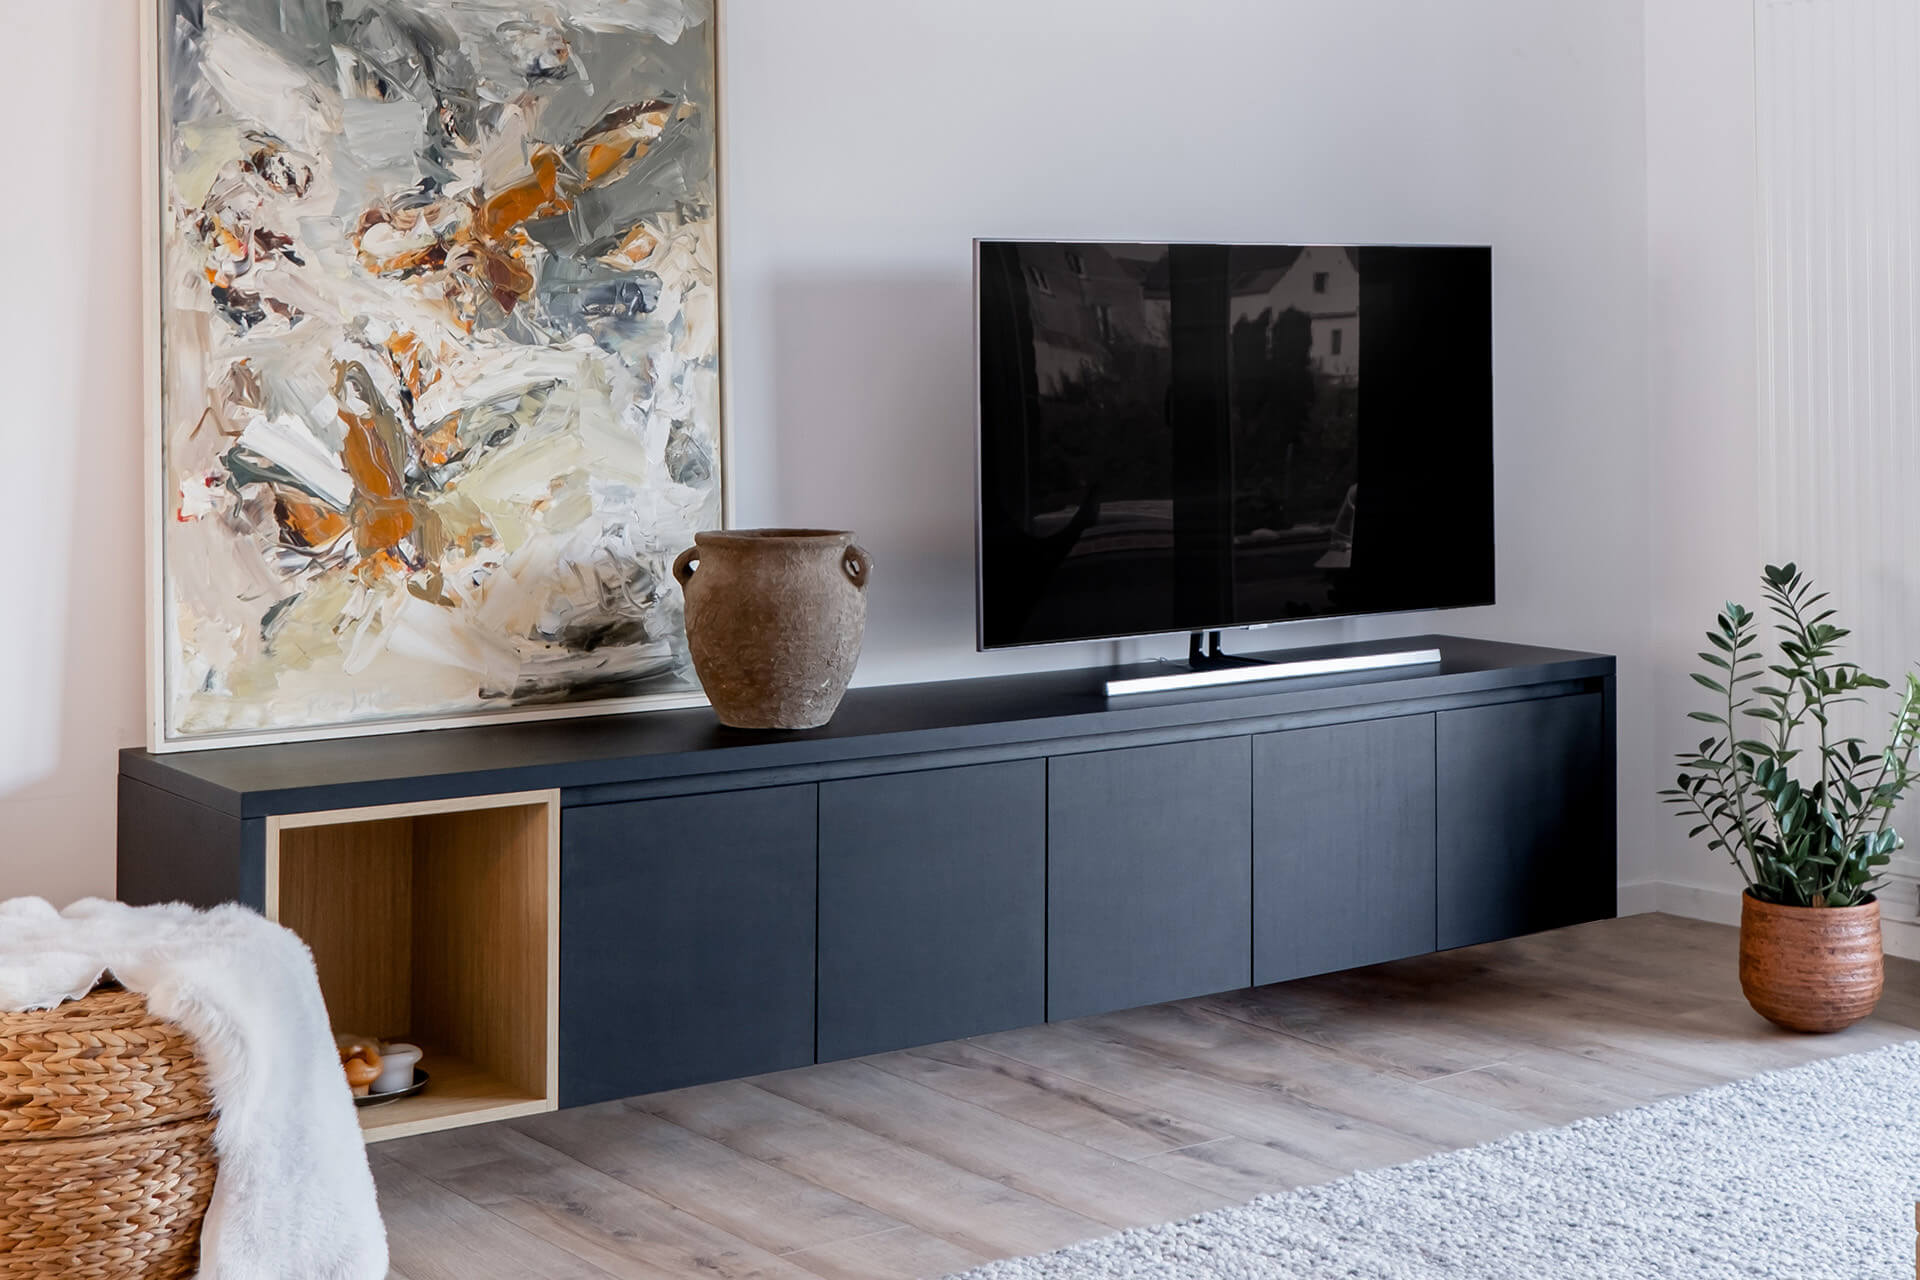 Made-to-measure floating TV unit in black and wood